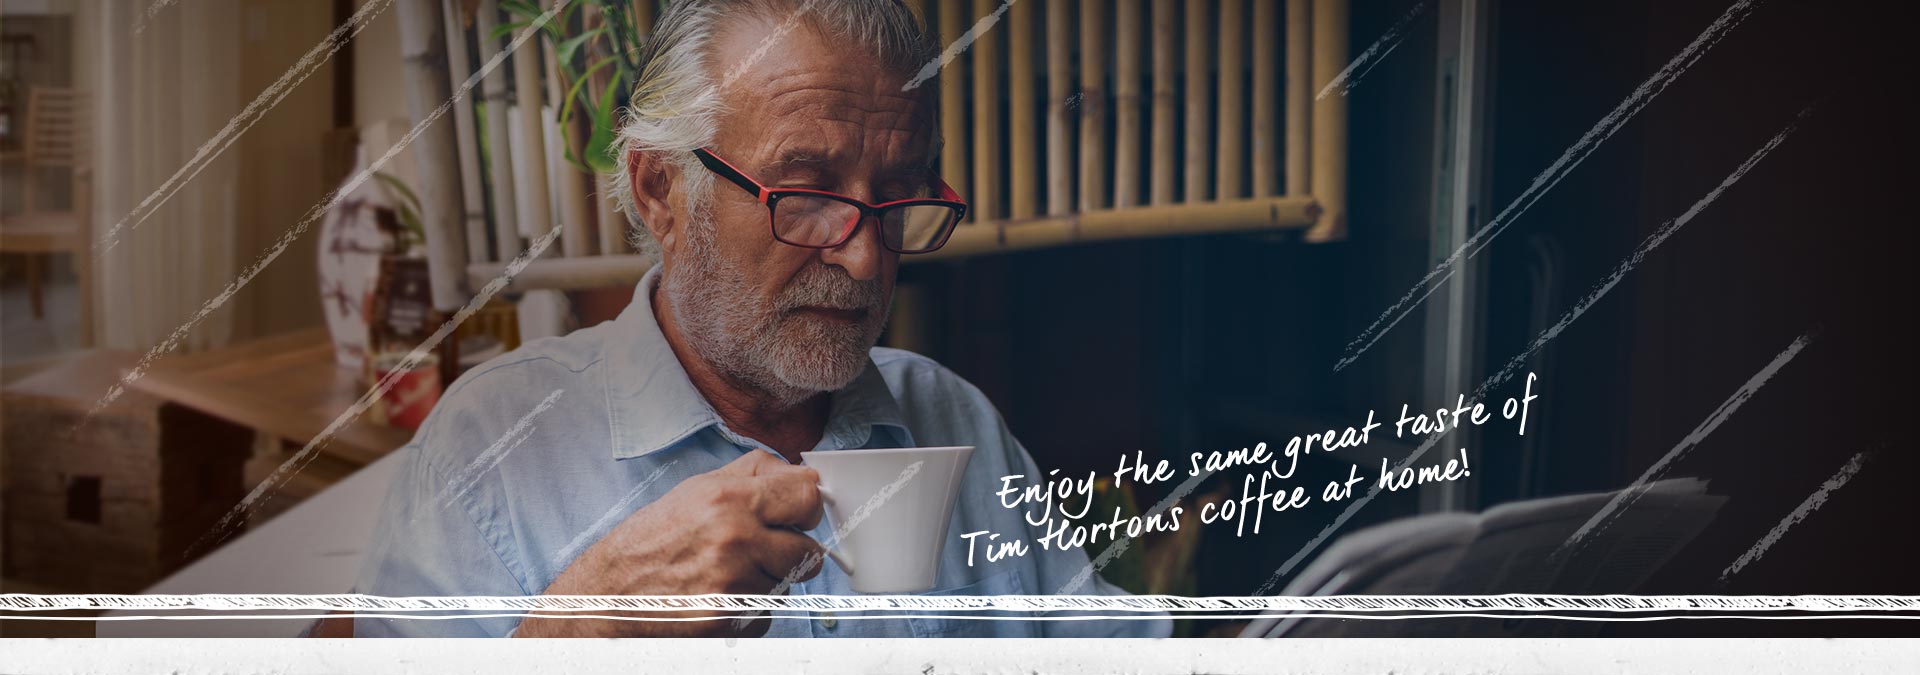 Enjoy the same great taste of Tim Hortons coffee at home